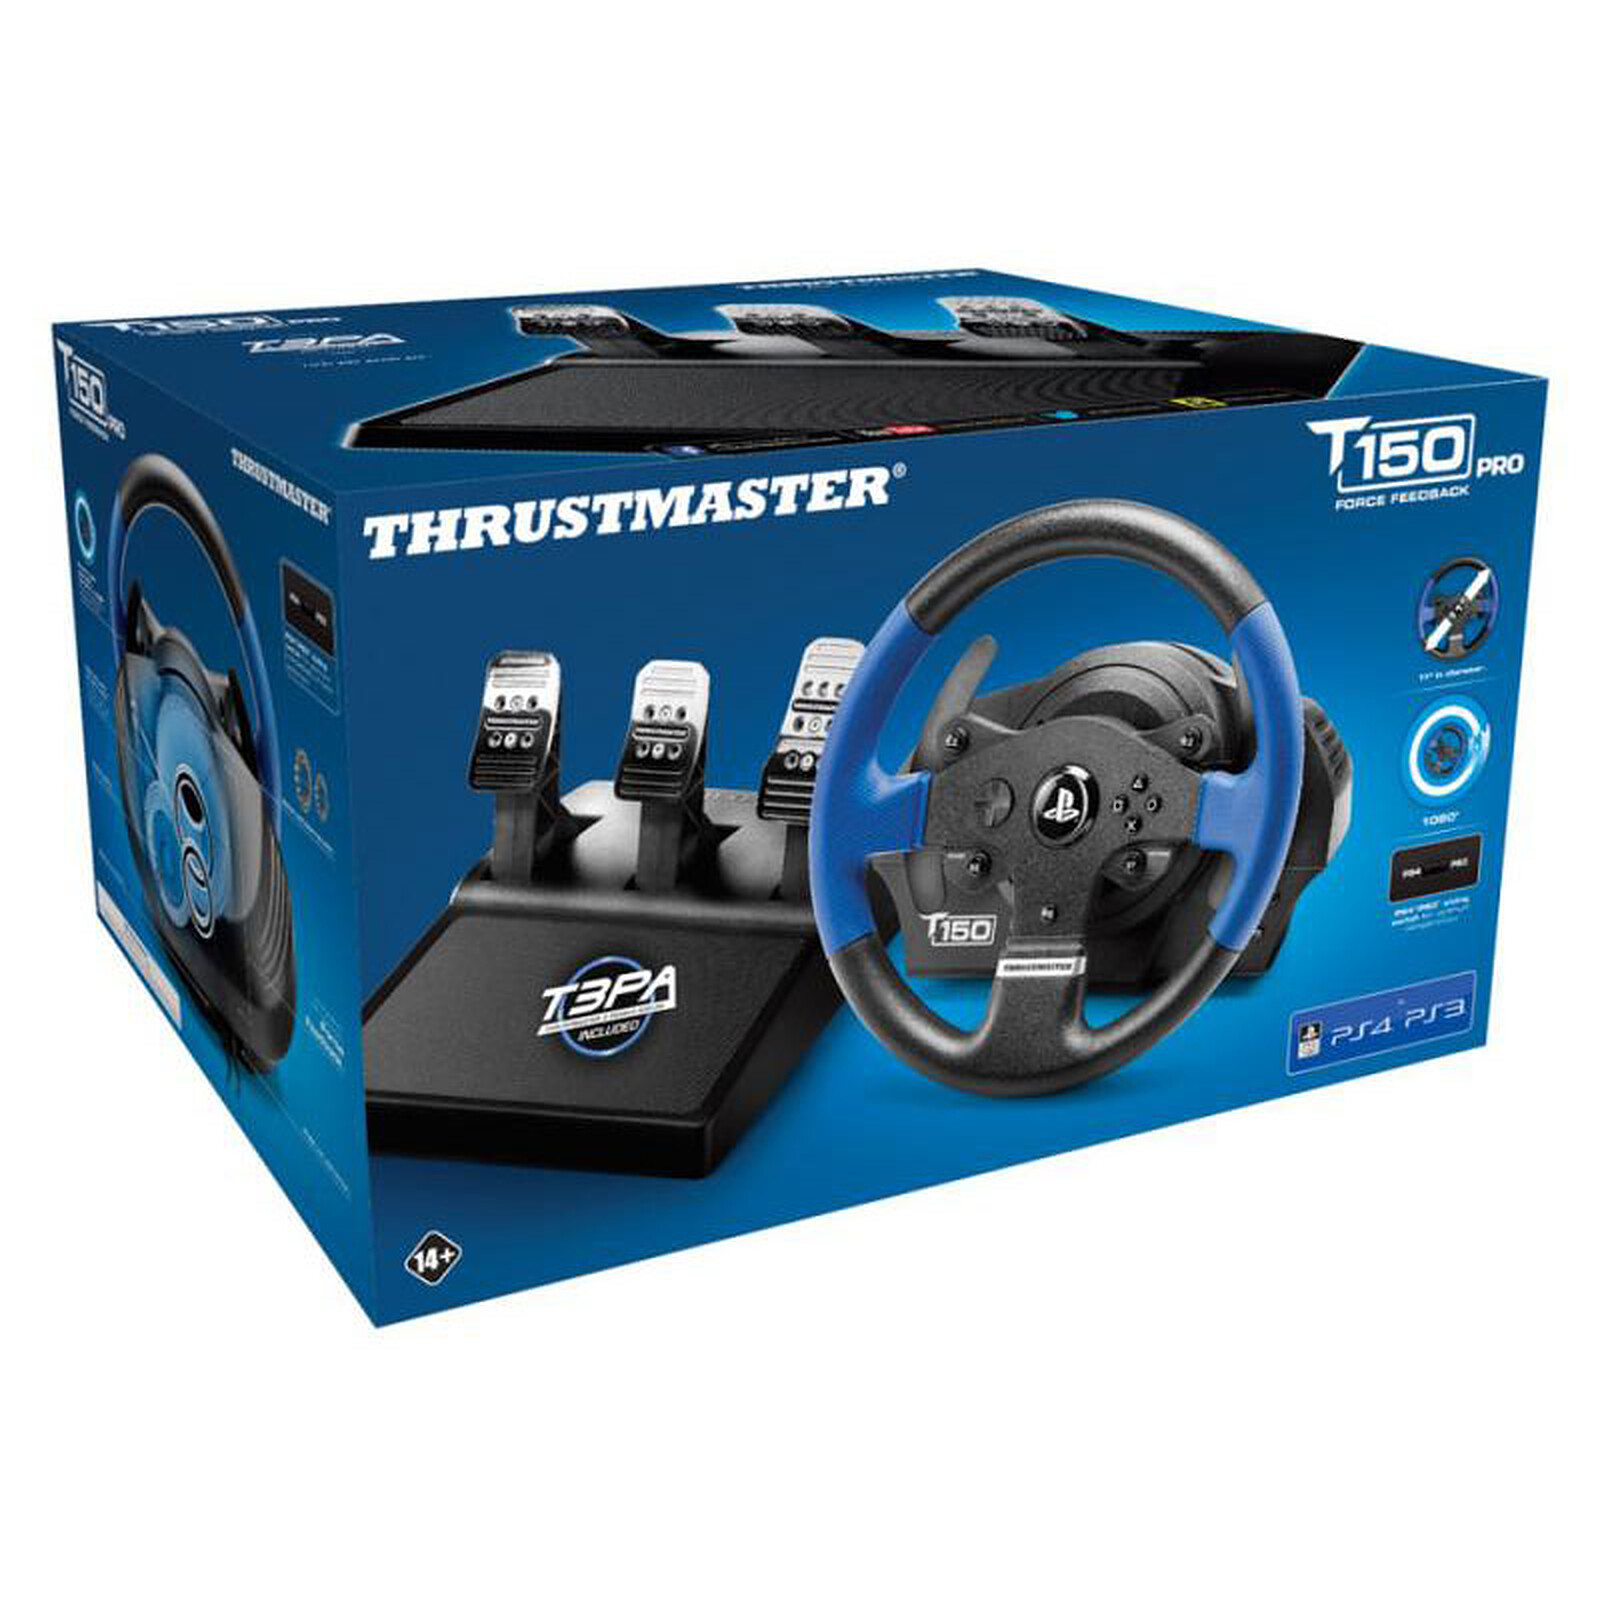 Thrustmaster T150 Pro Review